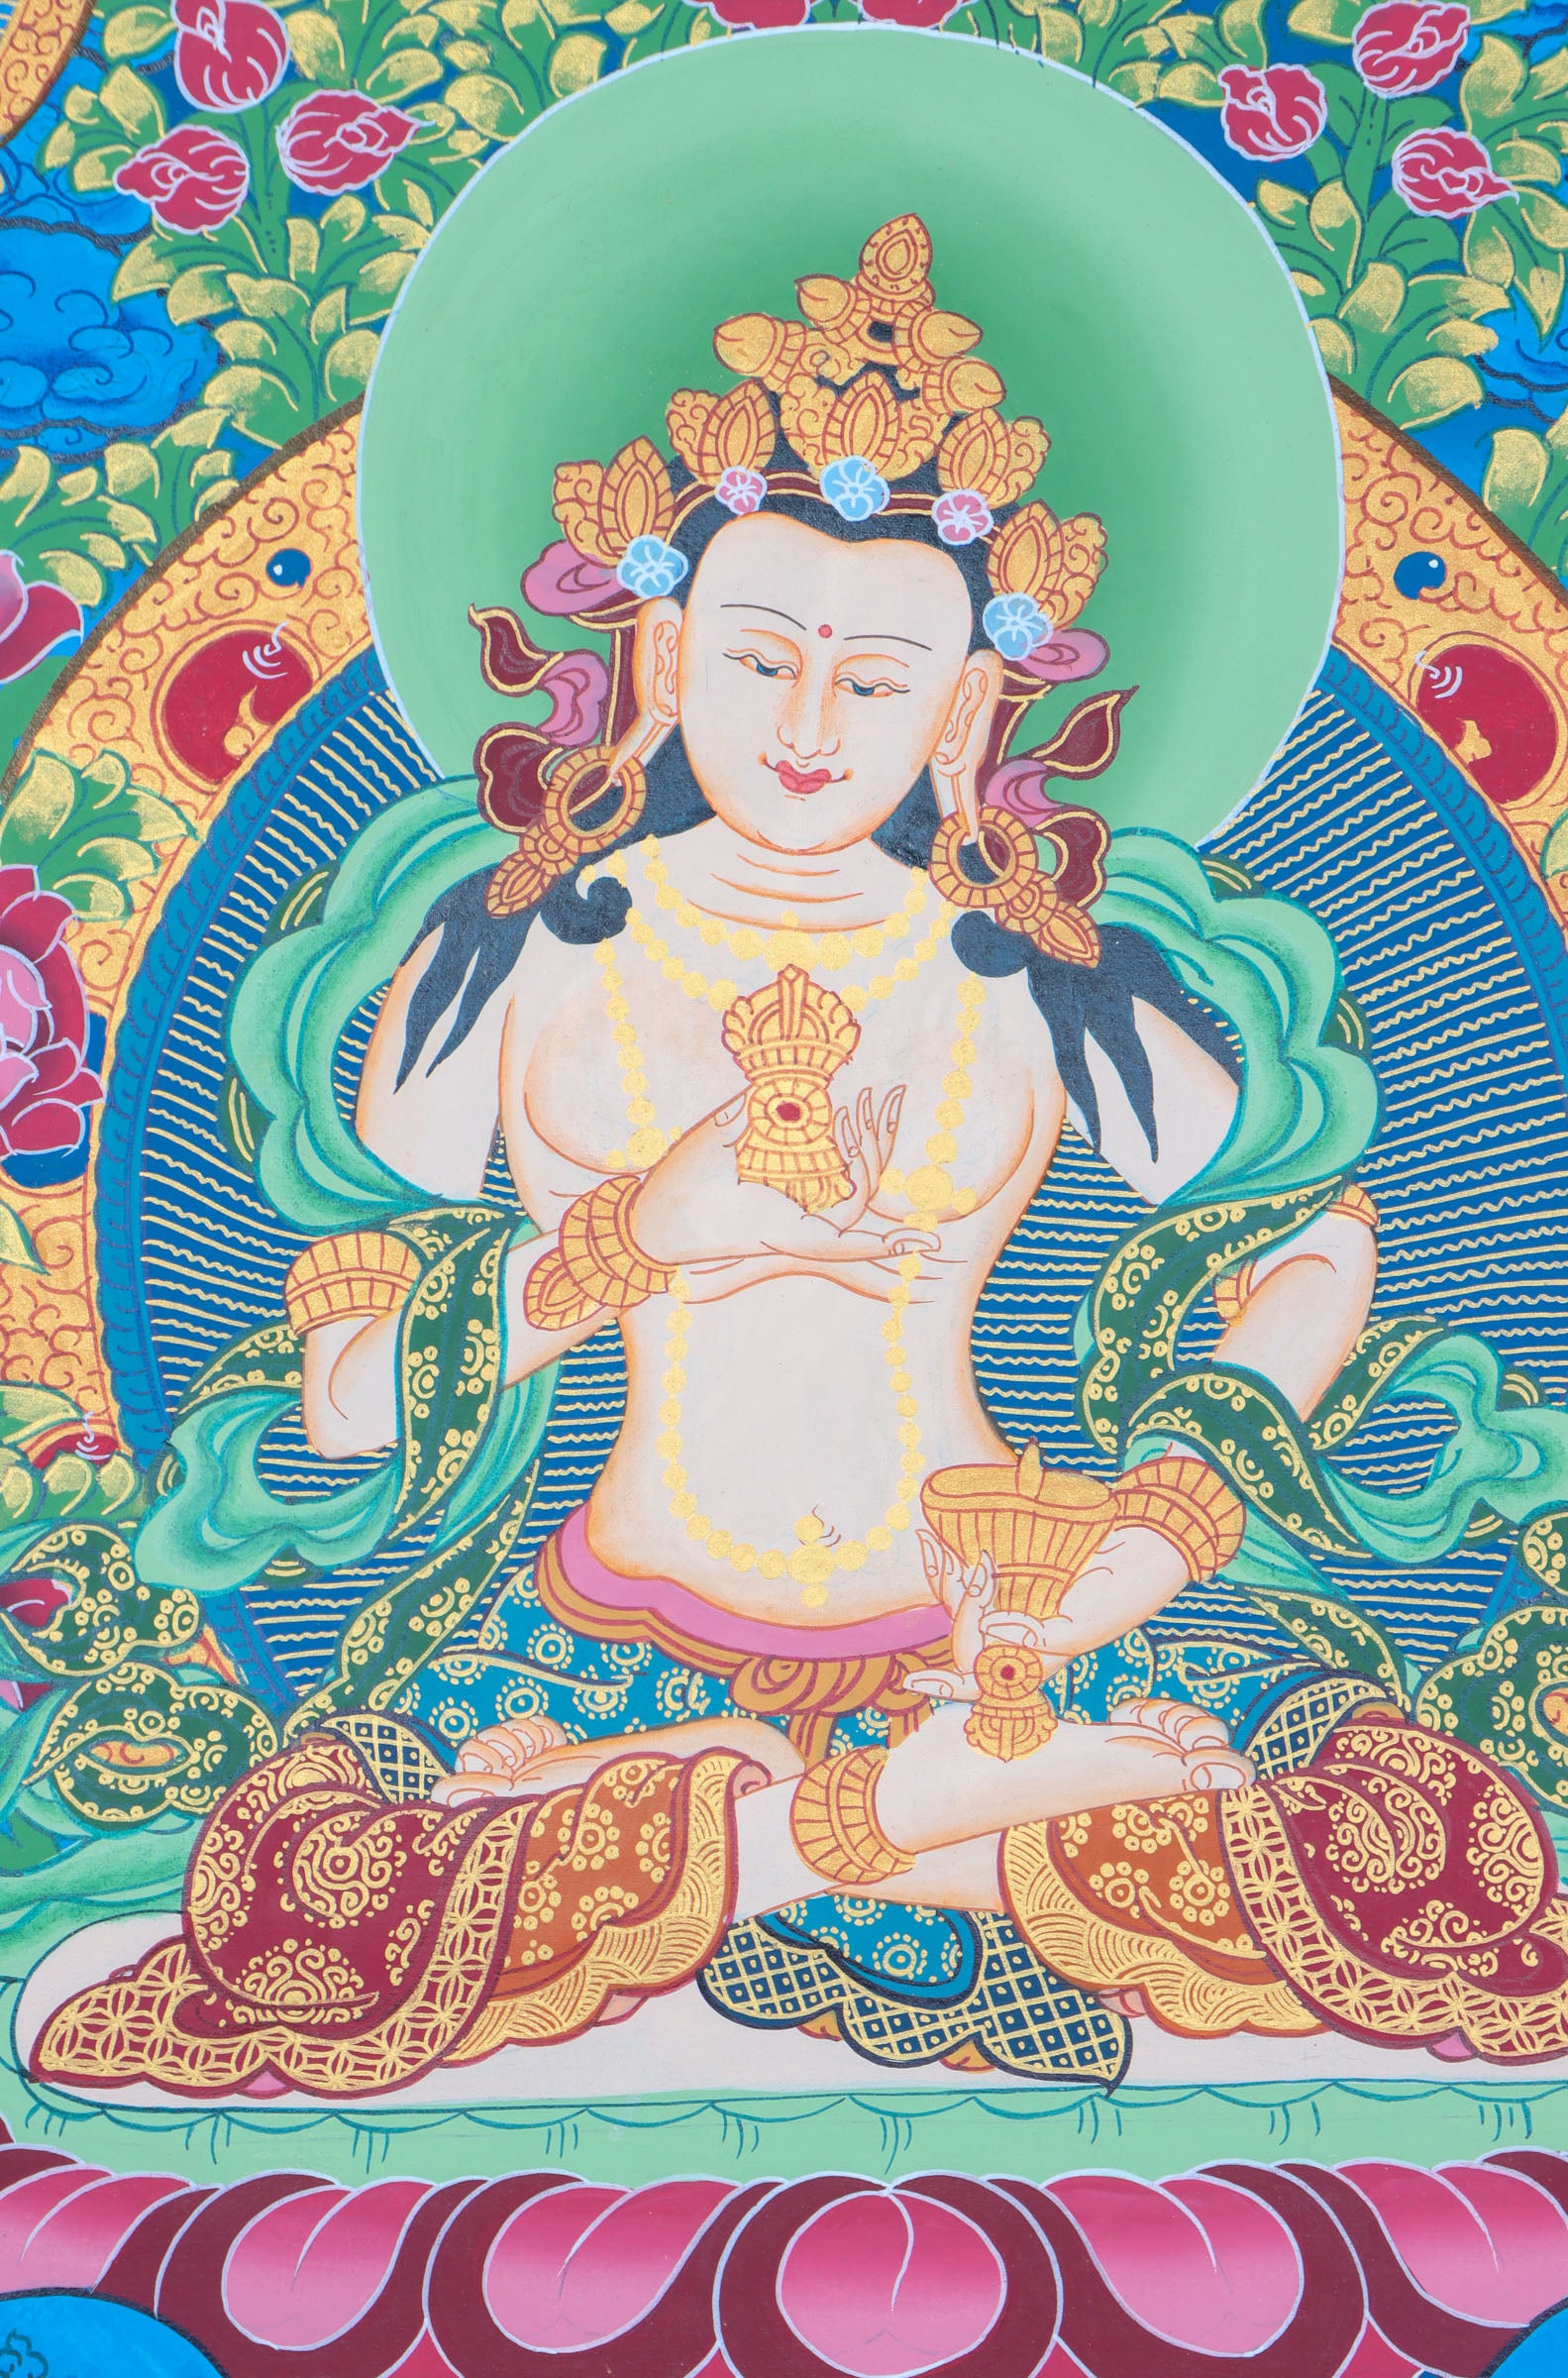 Bajrasattva Thangka for healing of emotional wounds, purifying the mind, and bringing about positive changes in one's life.